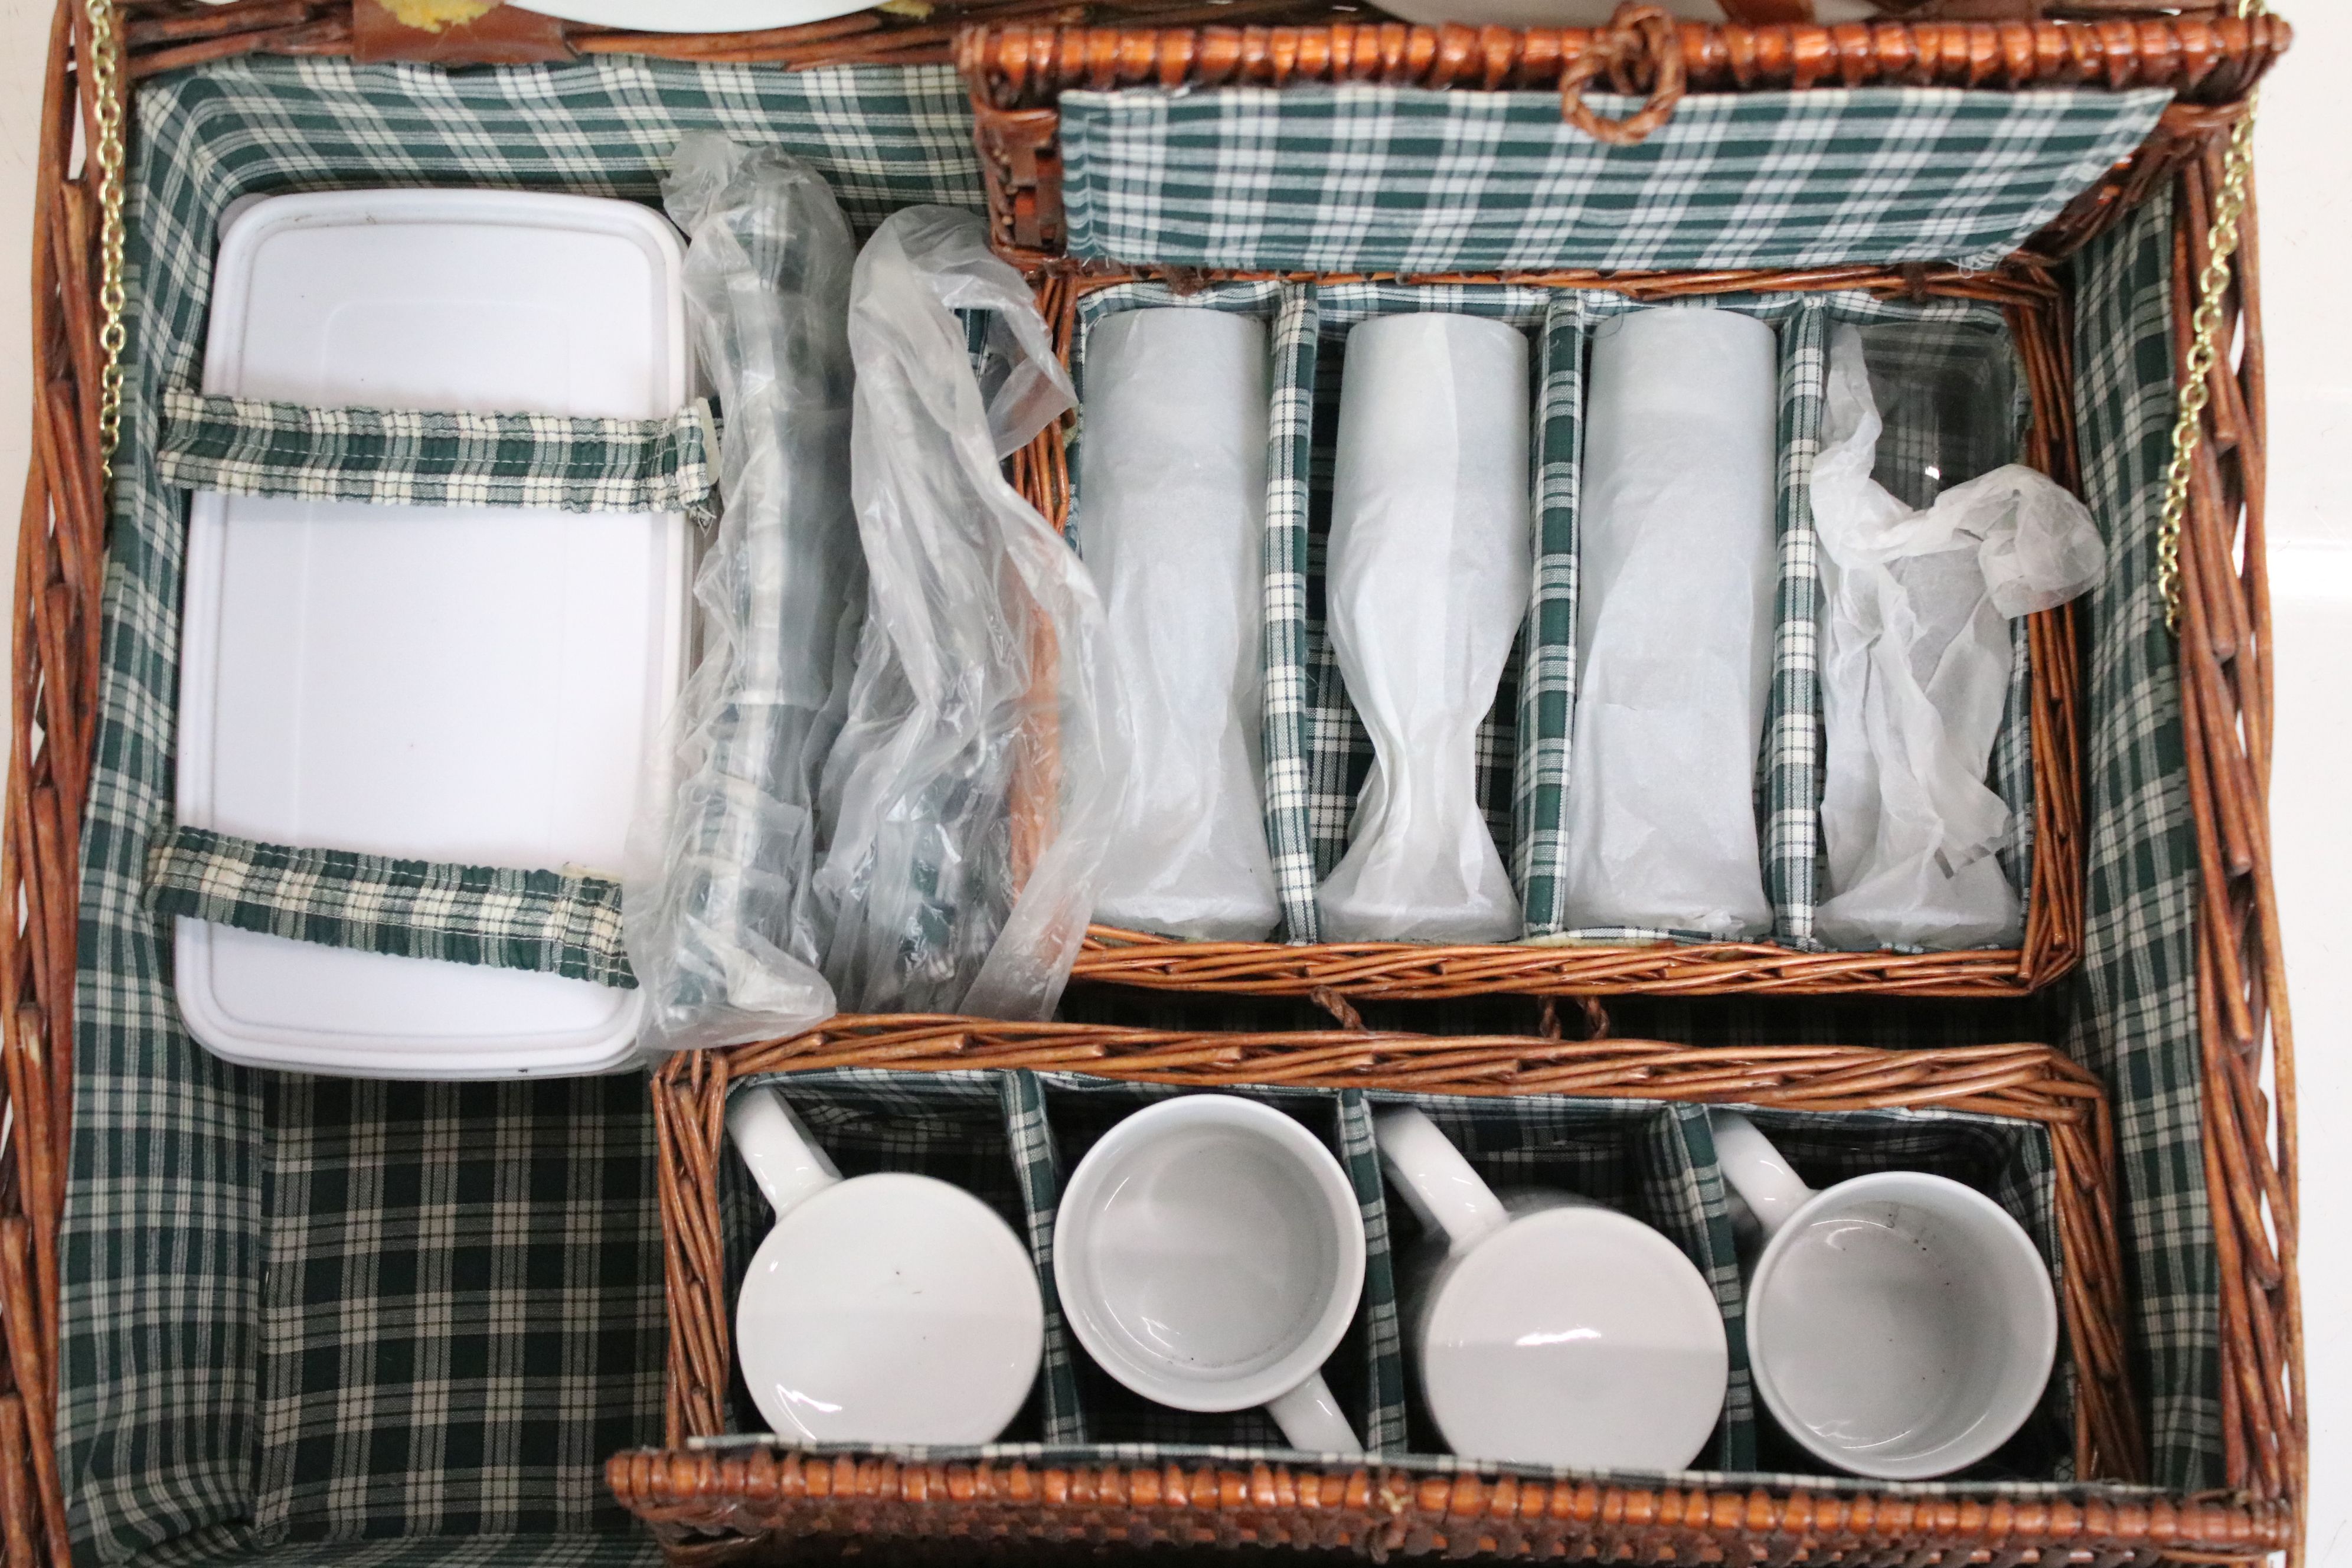 Four person picnic set in three wicker baskets, comprising cutlery, mugs, champagne glasses, - Image 5 of 7